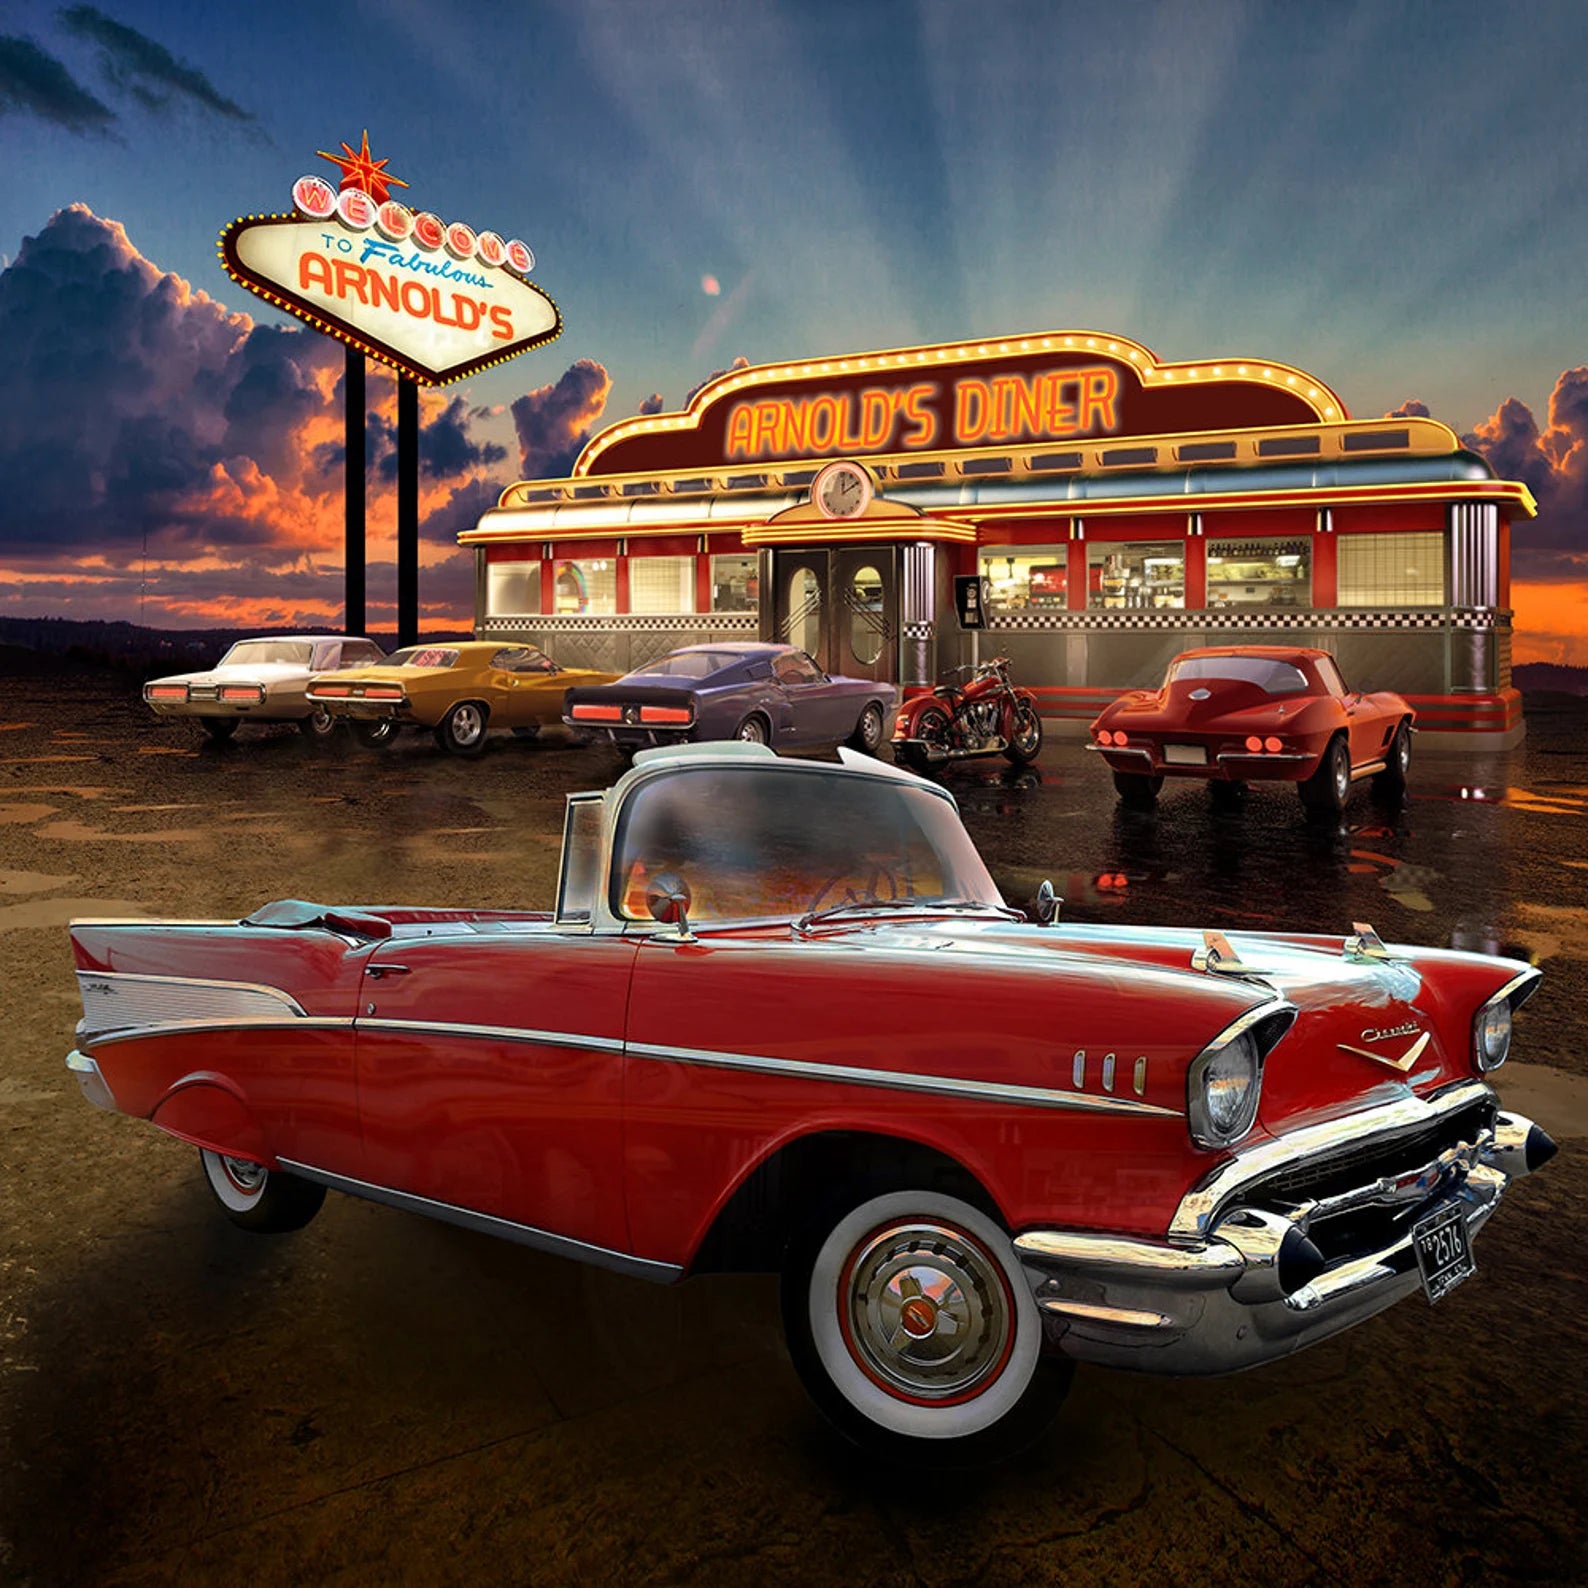 Red 57 Chevy Diner Photo Backdrop - Pro 10  x 10  